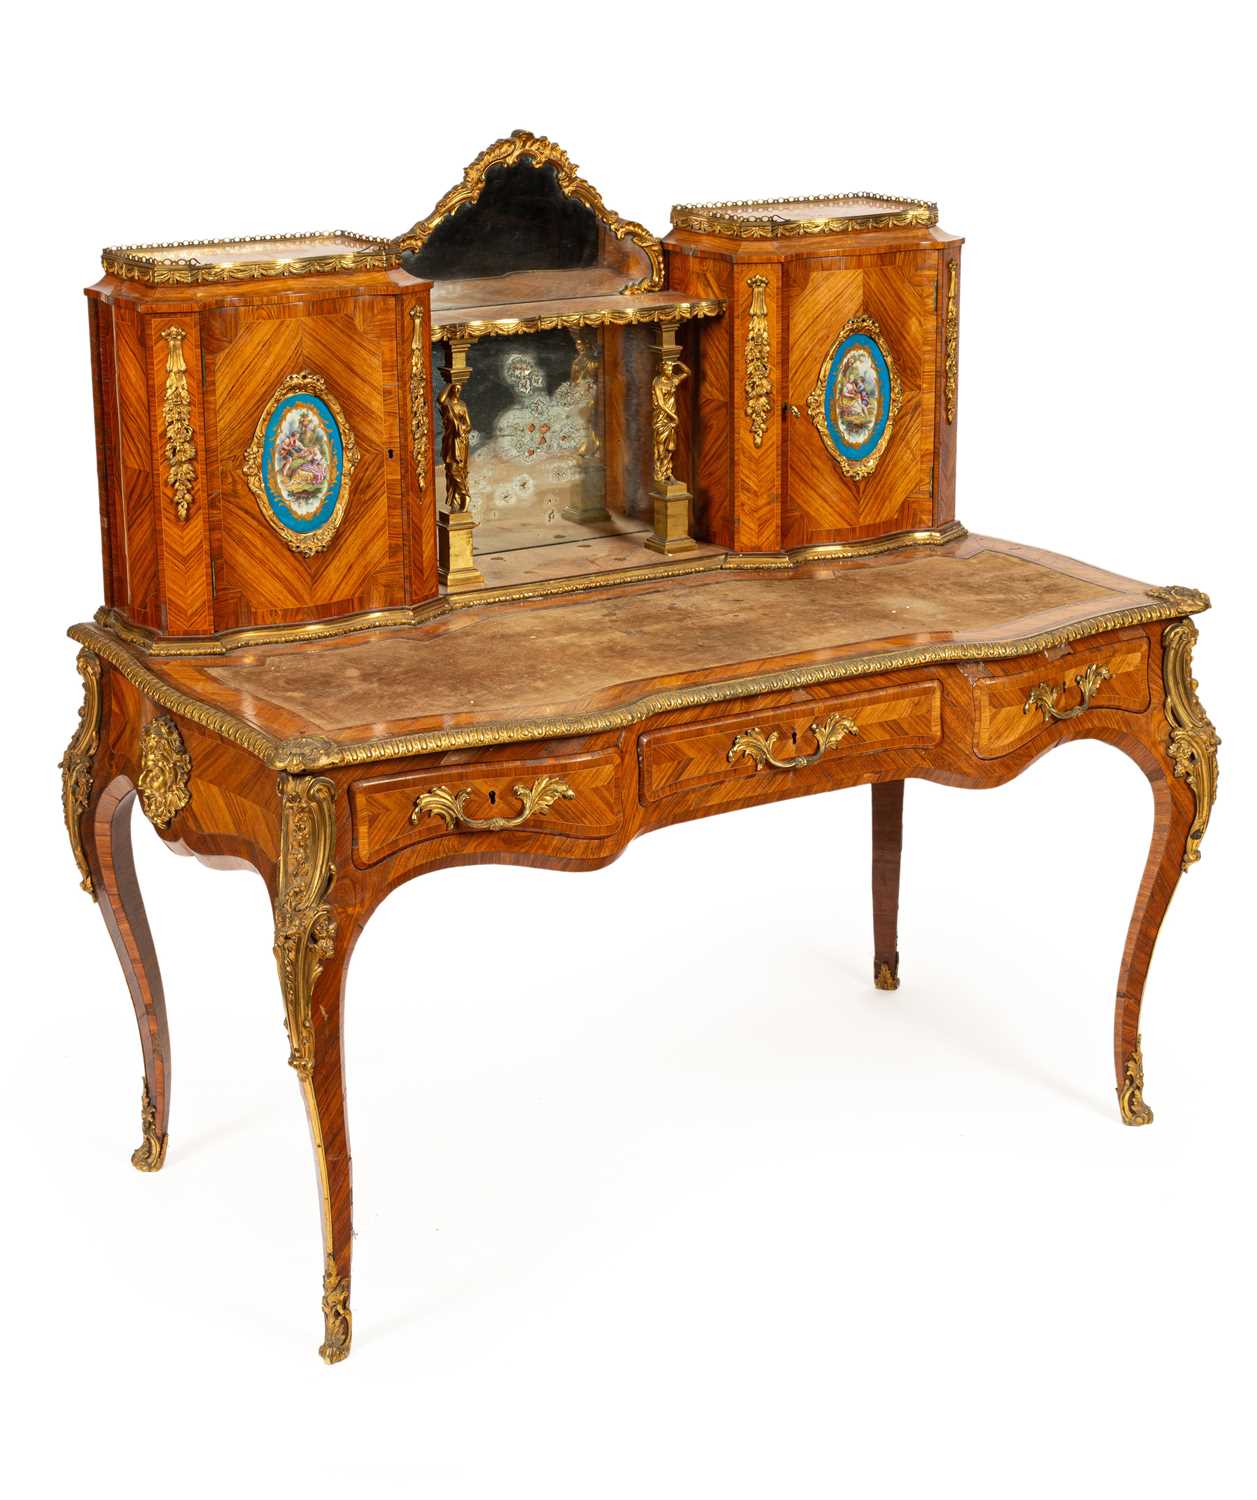 A Victorian ormolu mounted tulipwood and kingwood desk in the Louis XV style